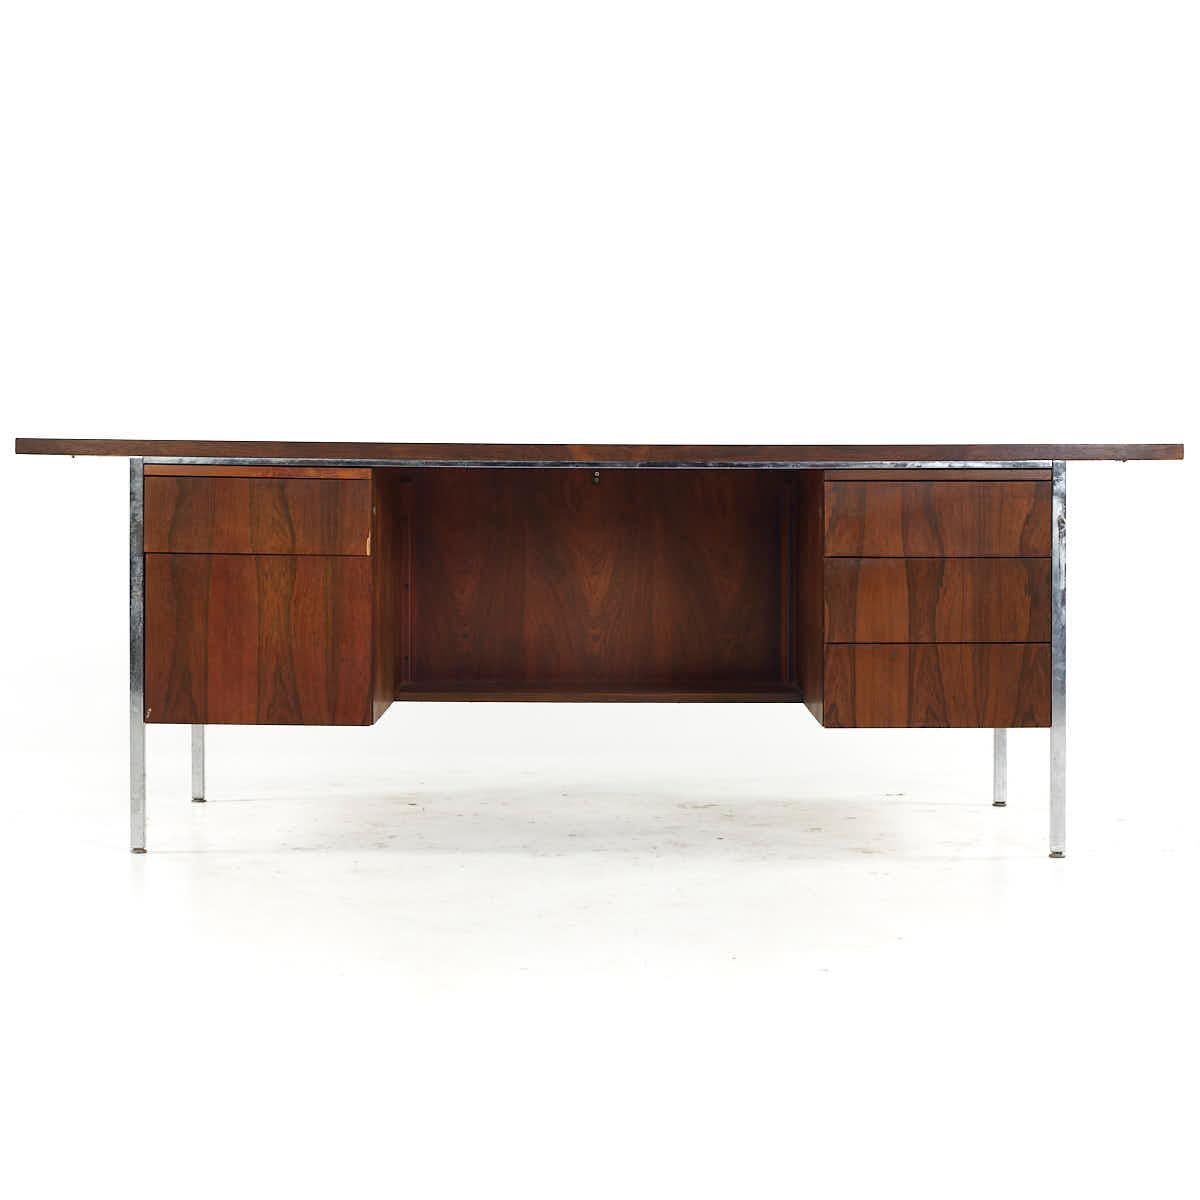 Florence Knoll Style Mid Century Rosewood and Chrome Executive Desk

This desk measures: 82 wide x 38 deep x 29.25 high, with a chair clearance of 27.25 inches

All pieces of furniture can be had in what we call restored vintage condition. That